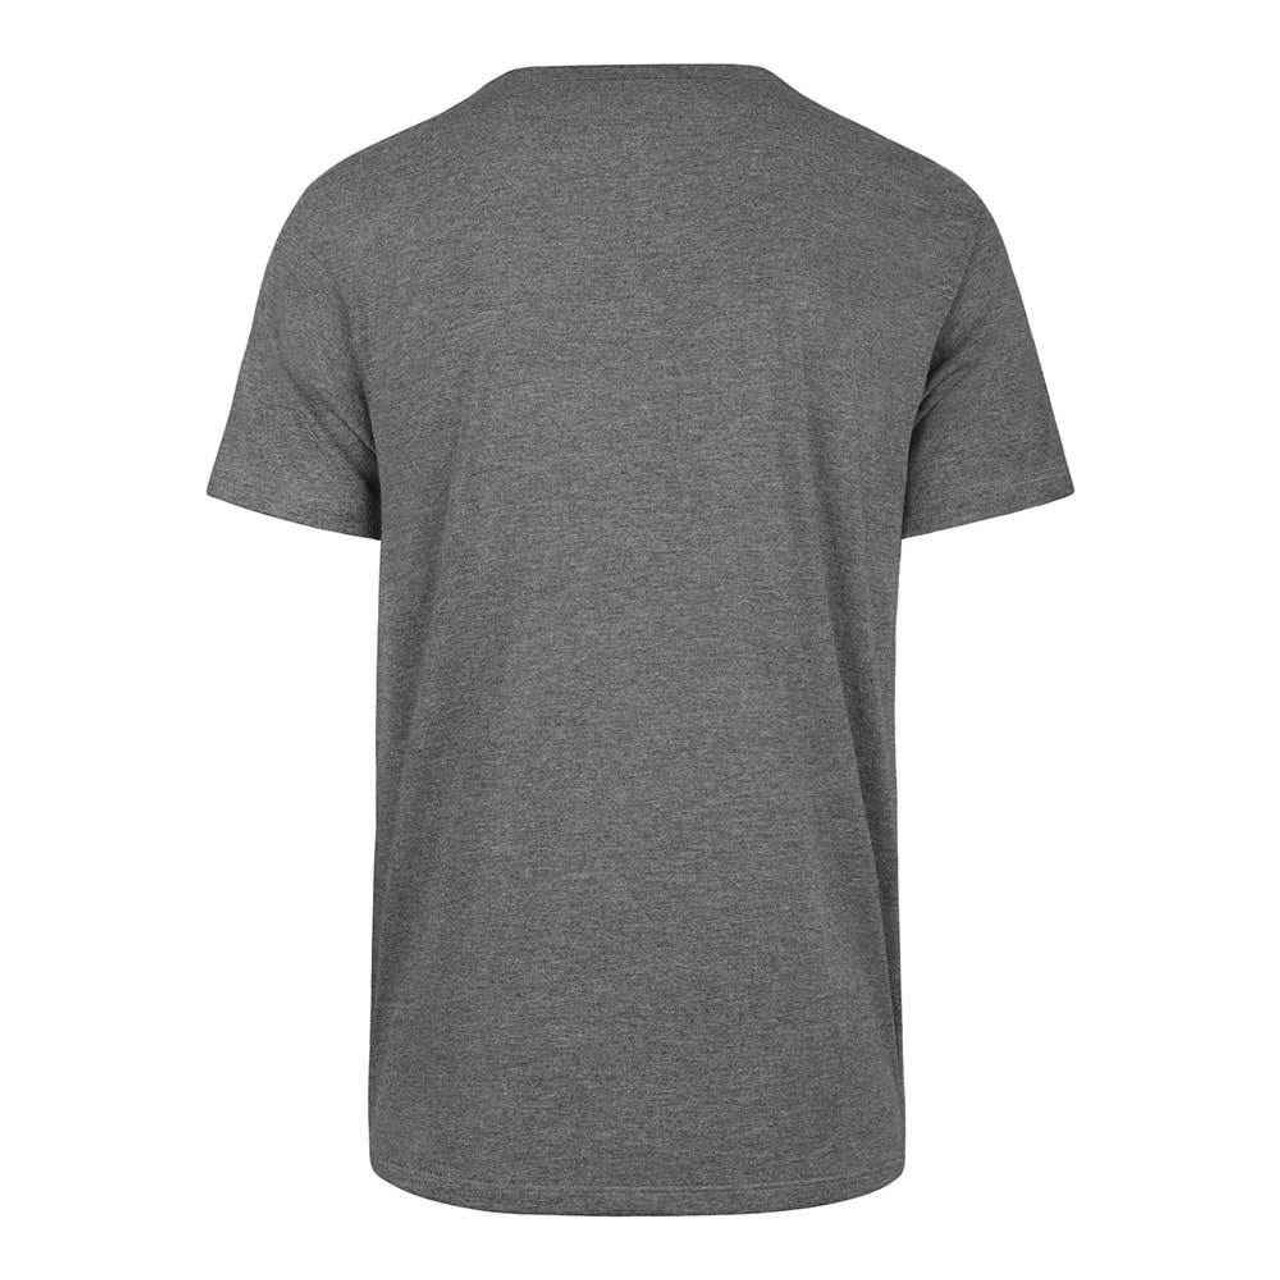 Grey Chicago Bears T-shirt | Afterpay Clothing Stores